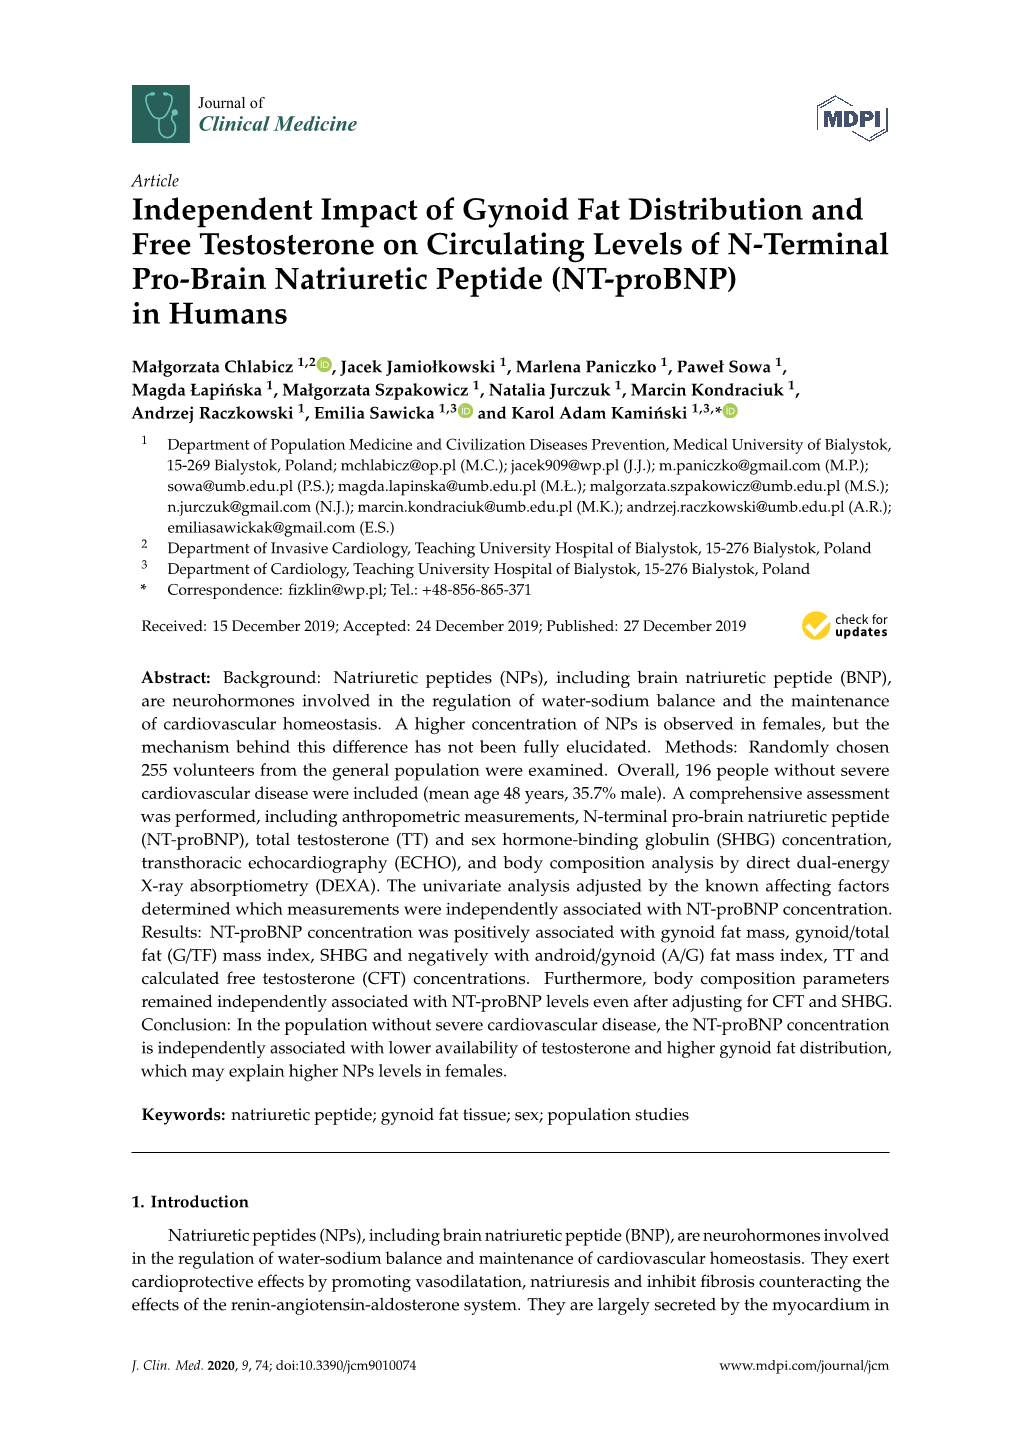 Independent Impact of Gynoid Fat Distribution and Free Testosterone on Circulating Levels of N-Terminal Pro-Brain Natriuretic Peptide (NT-Probnp) in Humans